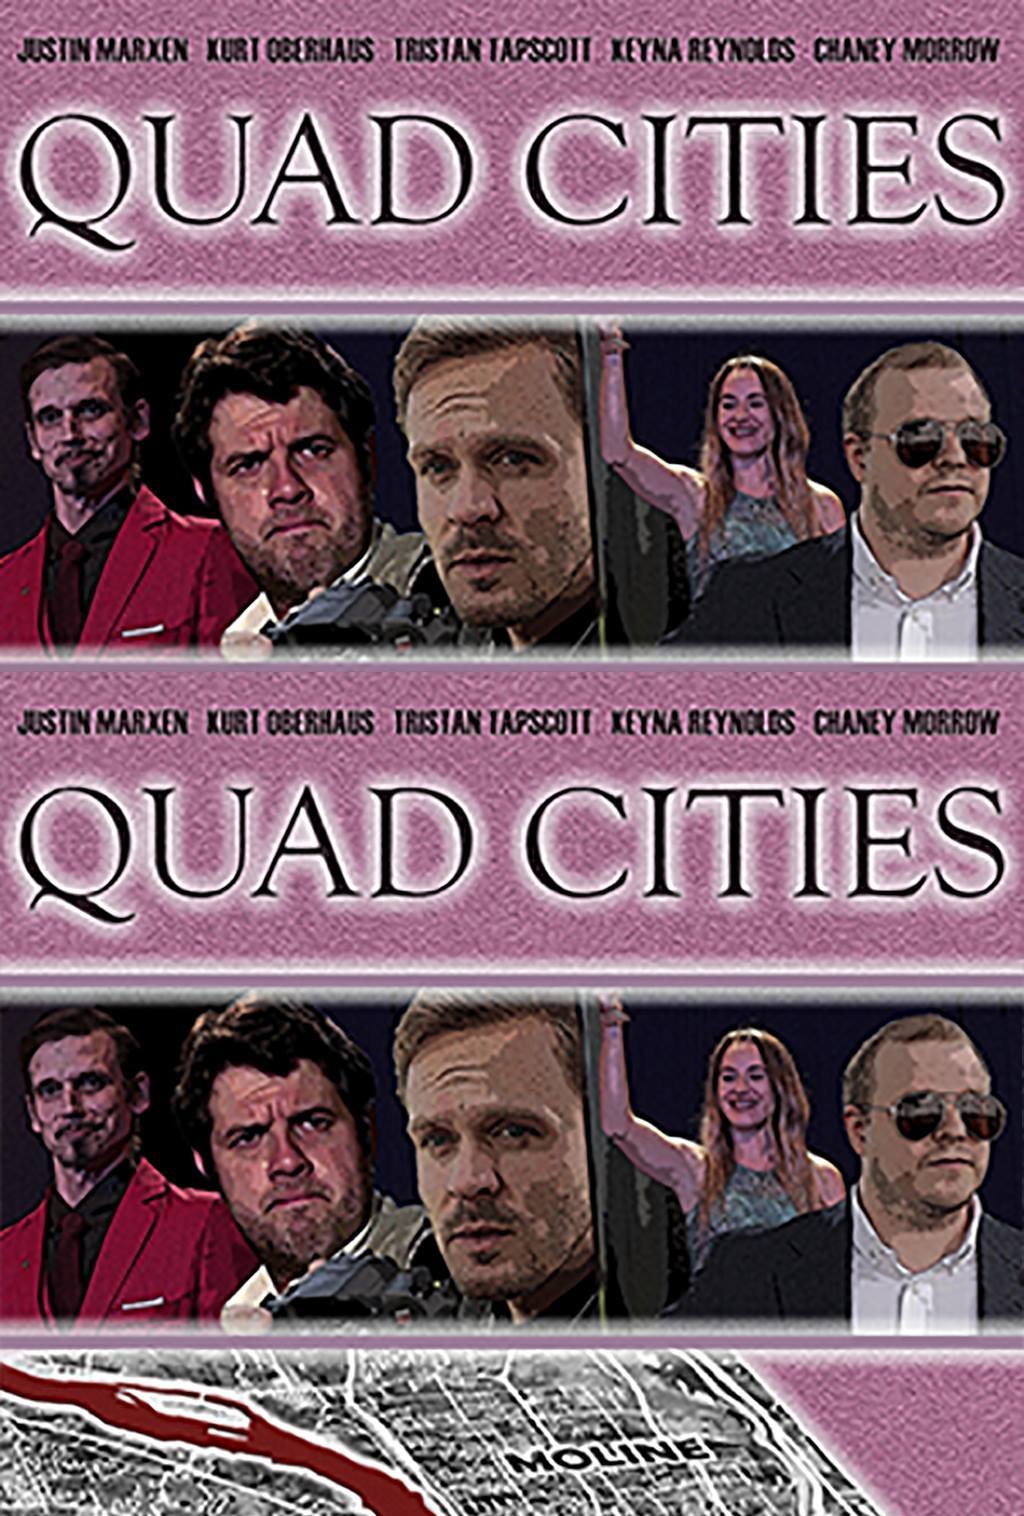 Take A Creepy Look At The Quad-Cities In New Crime Horror Web Series